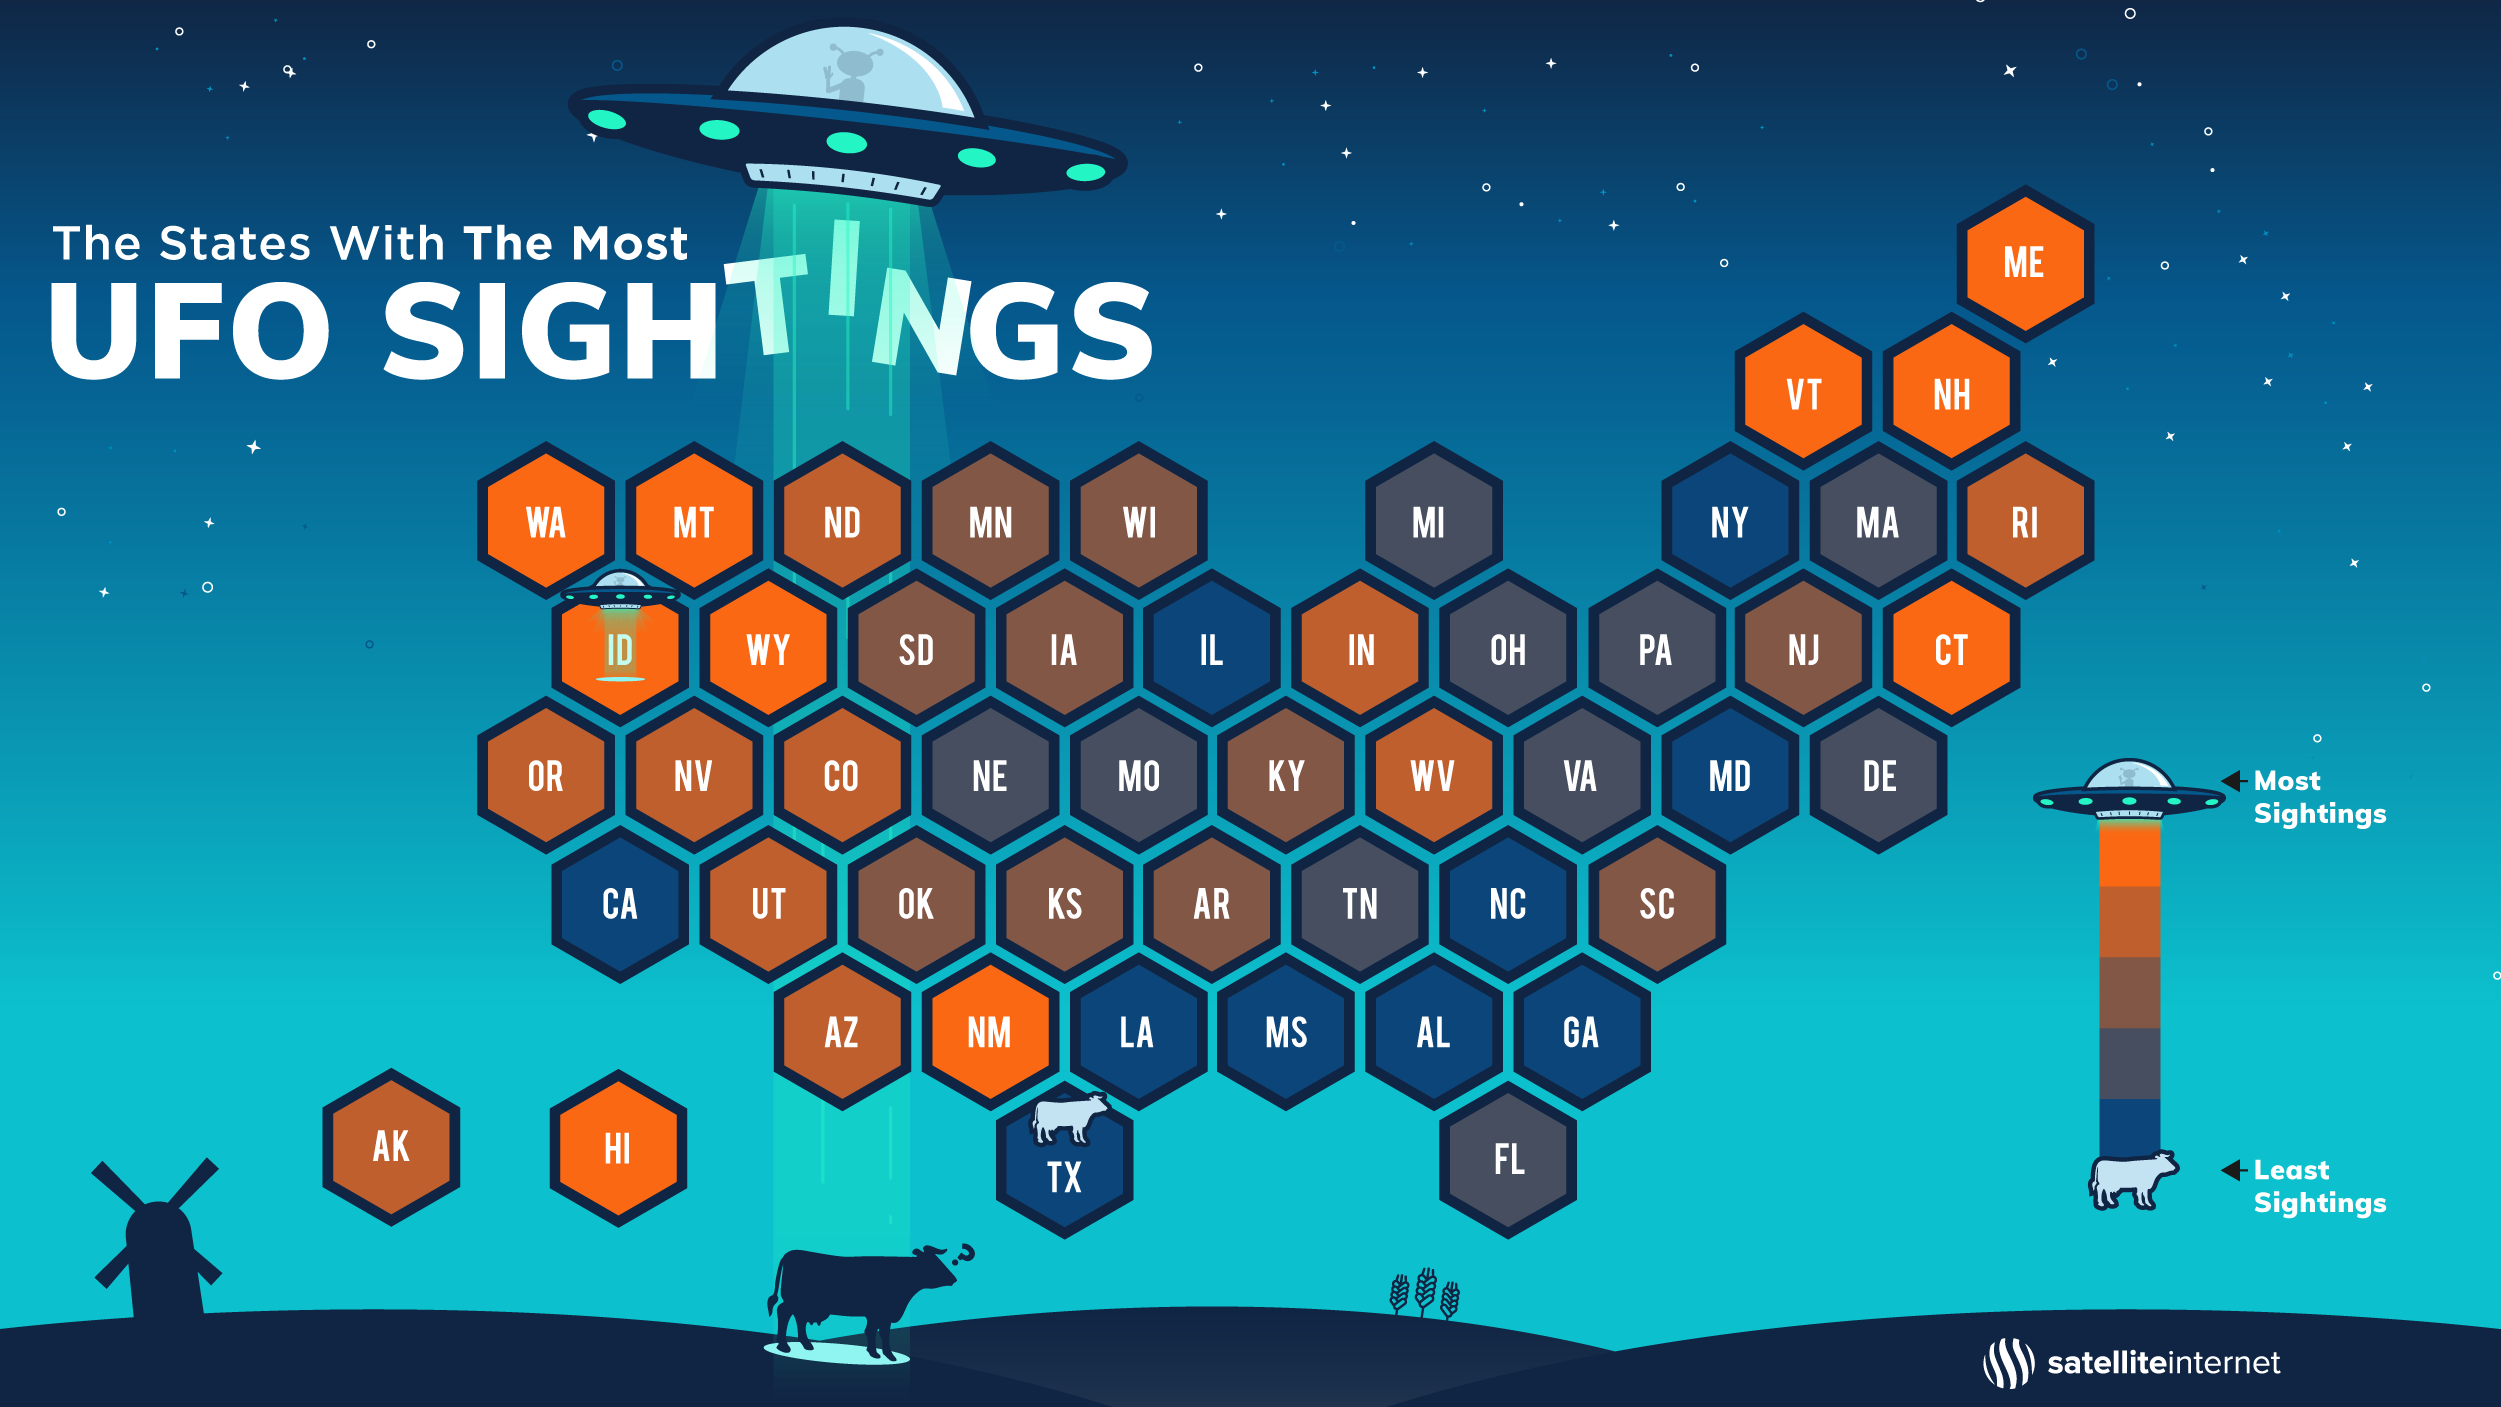 a-map-depiction-of-us-states-that-have-the-most-ufo-sightings-scrolller